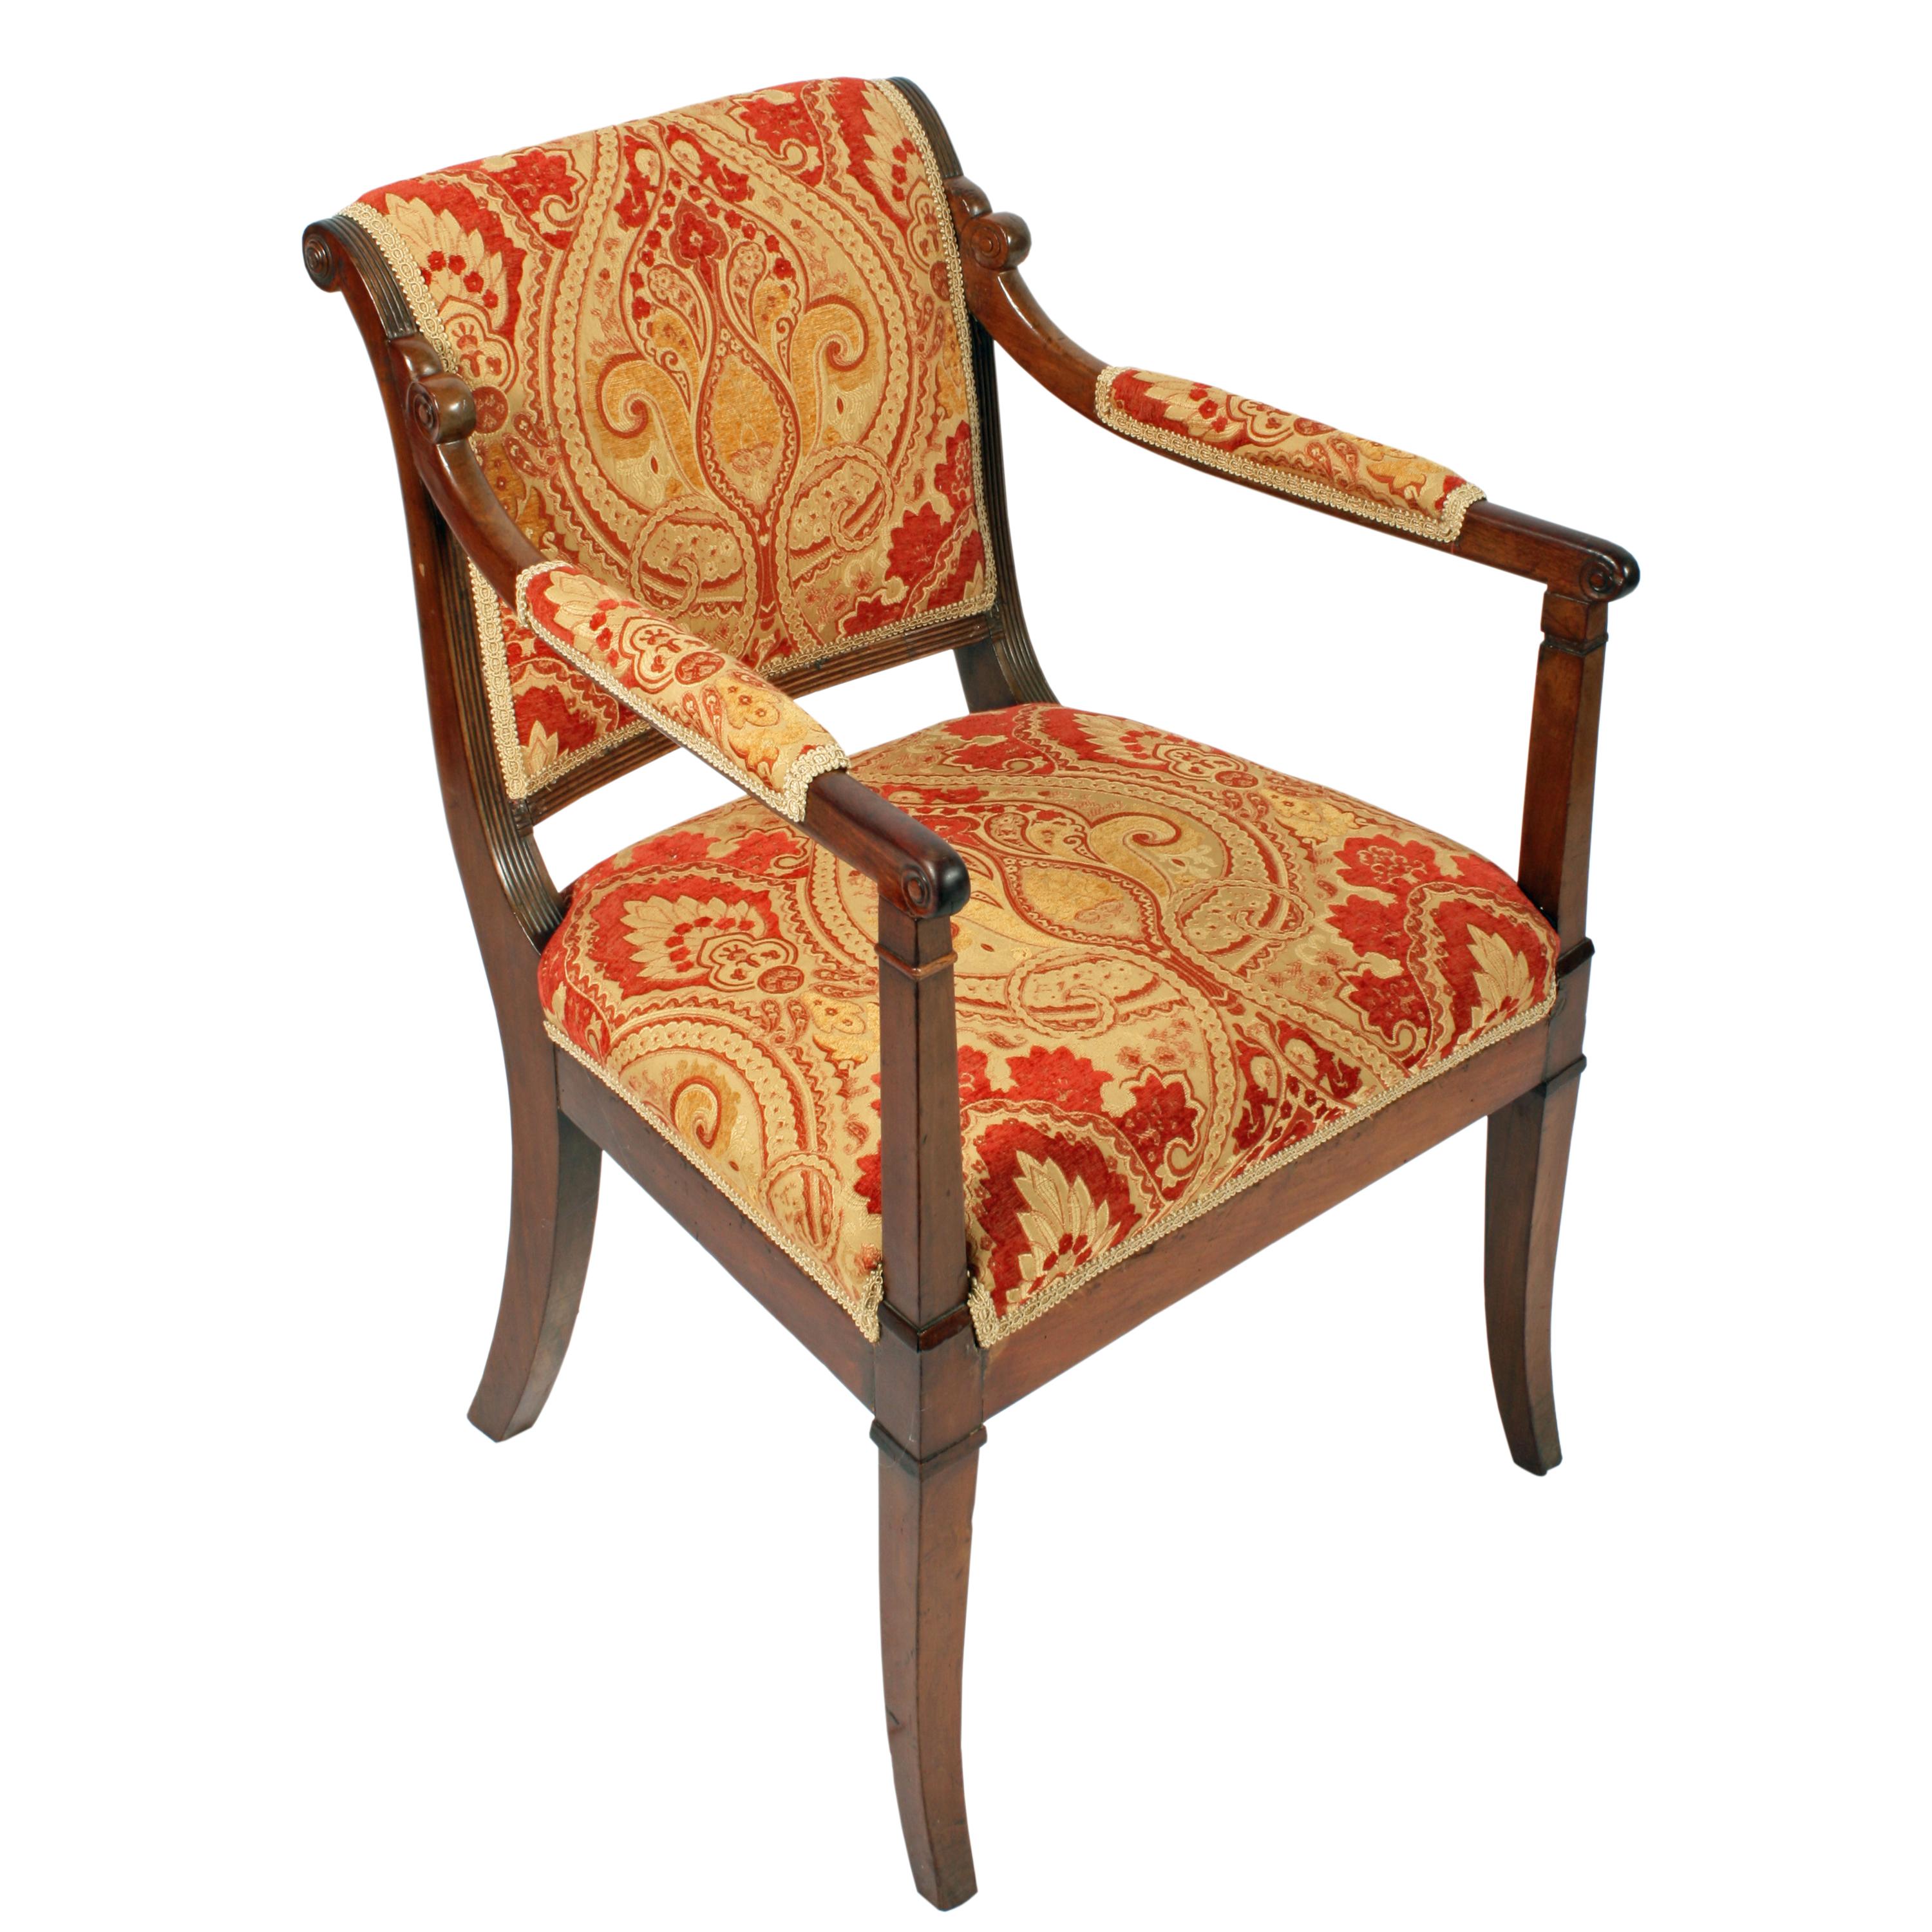 English 19th Century Empire Design Elbow Chair For Sale